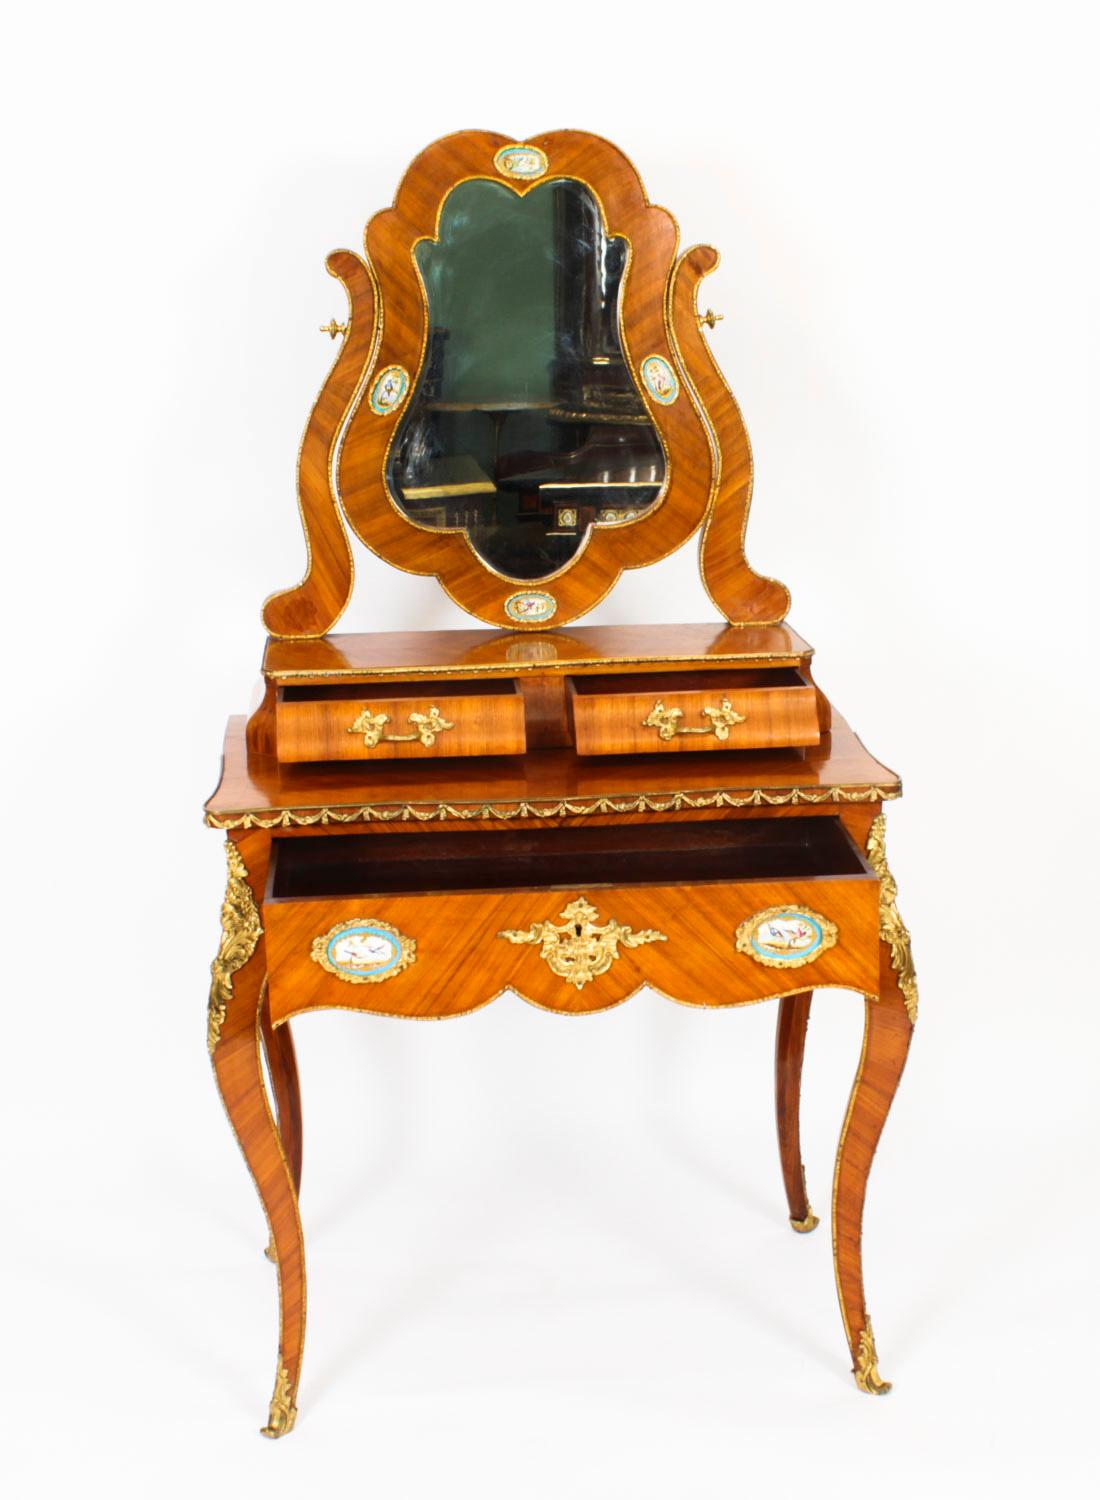 Antique Ormolu & Sevres Porcelain Mounted Dressing Table & Mirror 19th Century For Sale 12